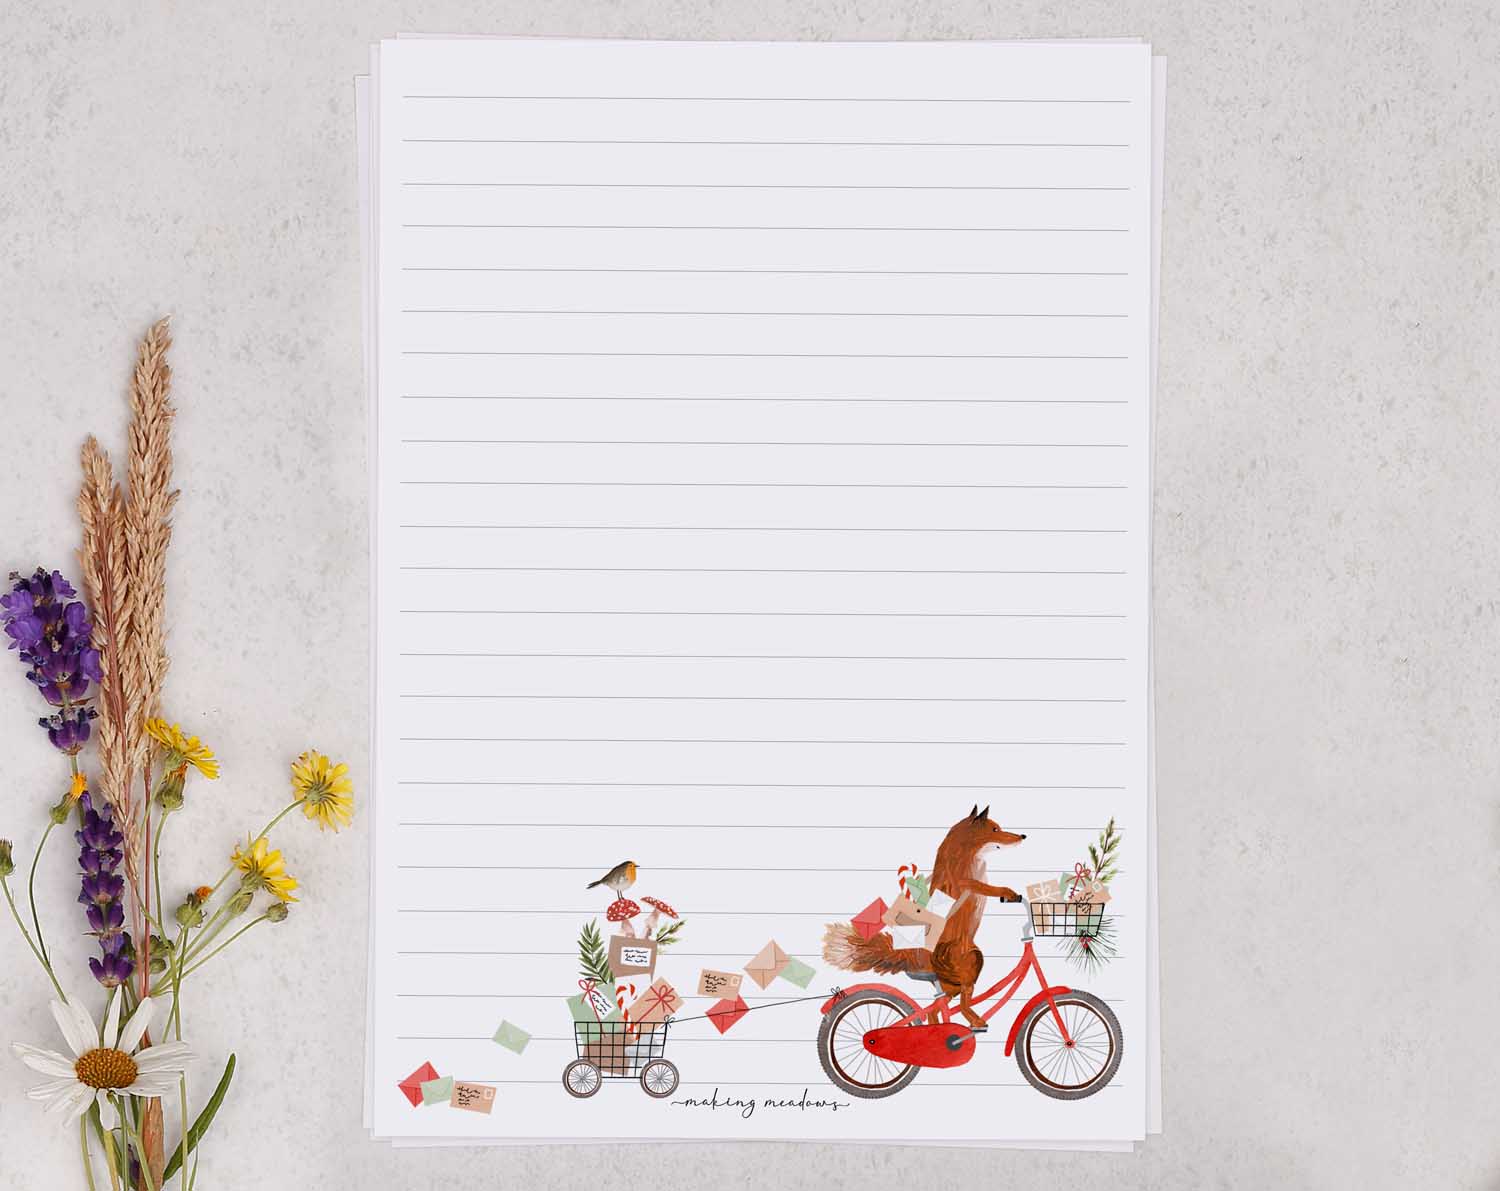 cute fox postman A5 writing paper set comes with matching envelopes.